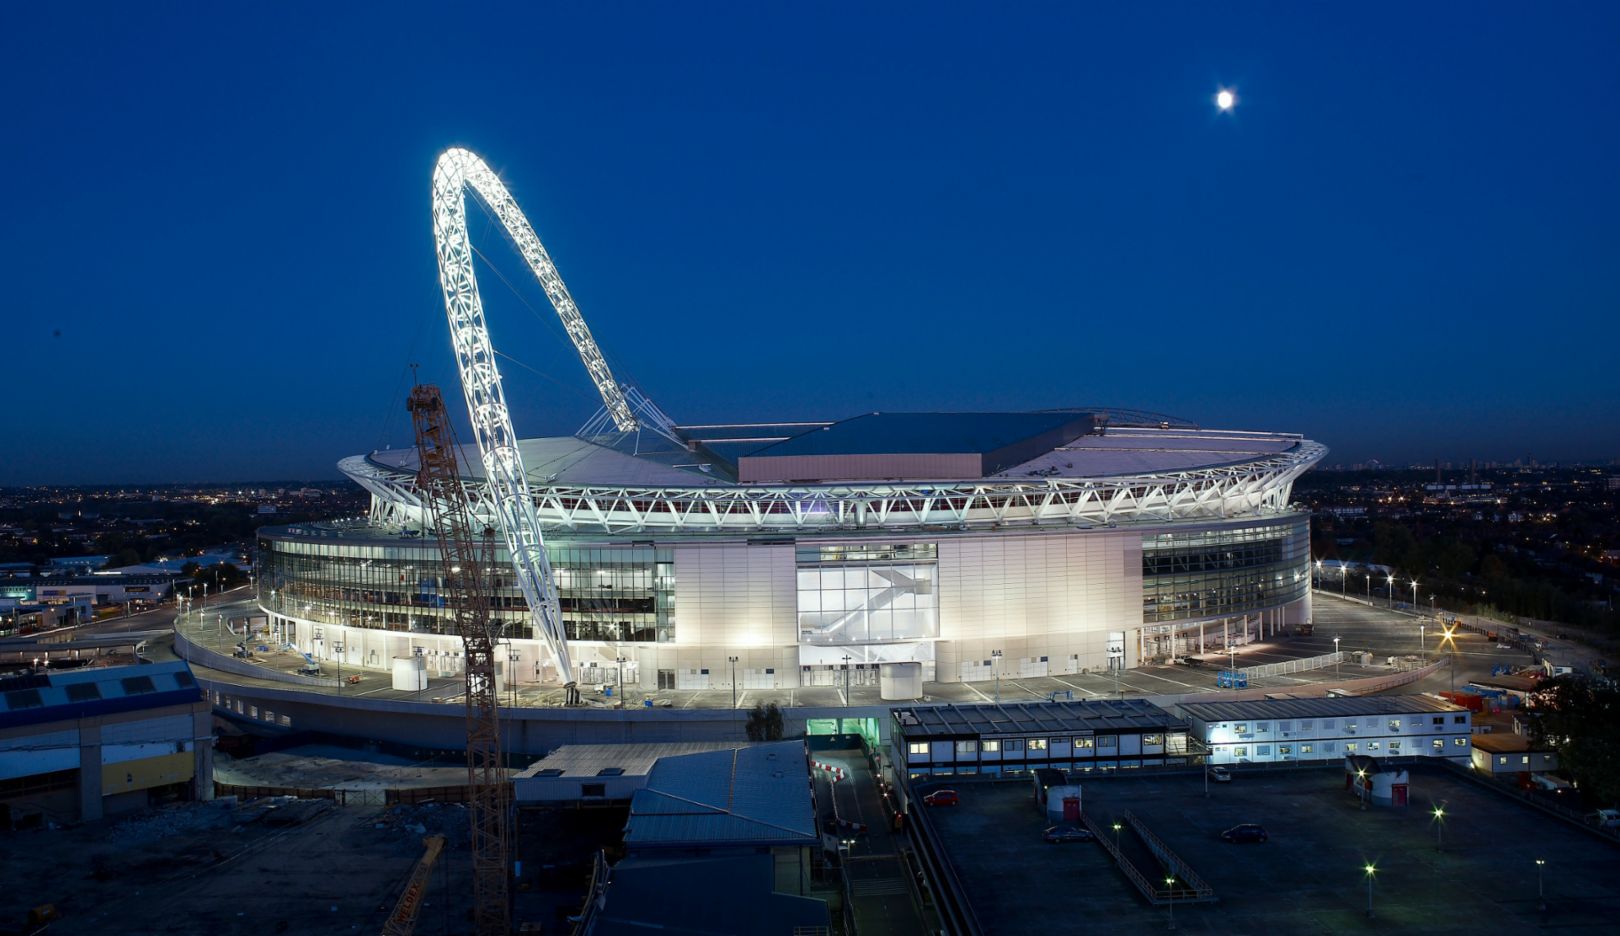 London's old stadium, which had become outdated, was demolished in 2003. The design for the new Wembley Stadium was carried out by Foster + Partners. With 90,000 seats and a retractable roof, it is one of the world's largest covered arenas. Photo: Nigel Young / Foster + Partners